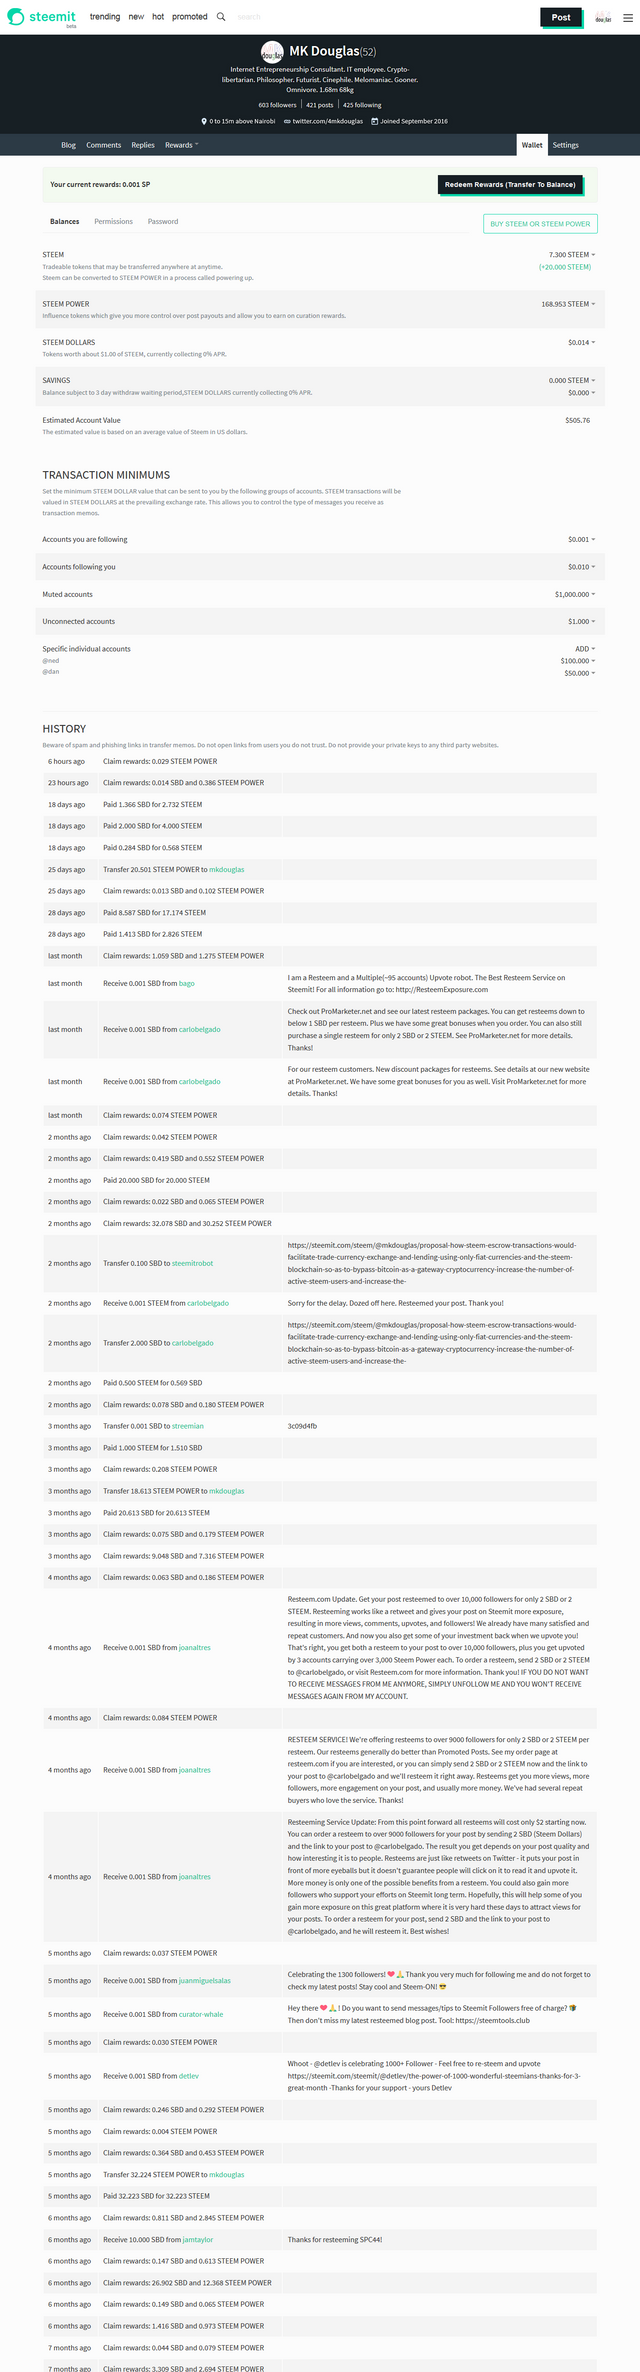 Transaction Minimums 2 Full Page.png